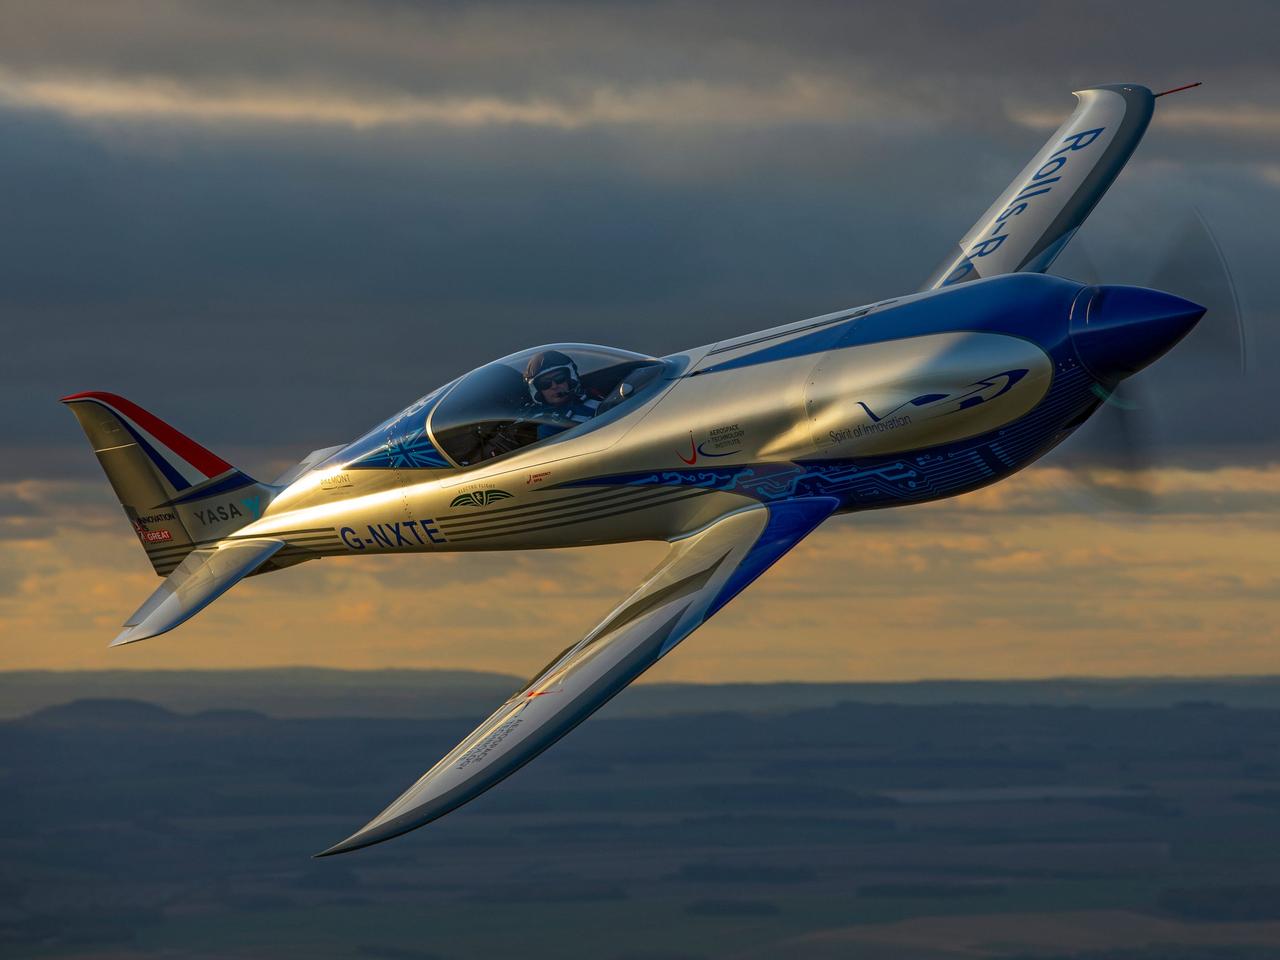 Rolls-Royce Spirit of Innovation all-electric aircraft.